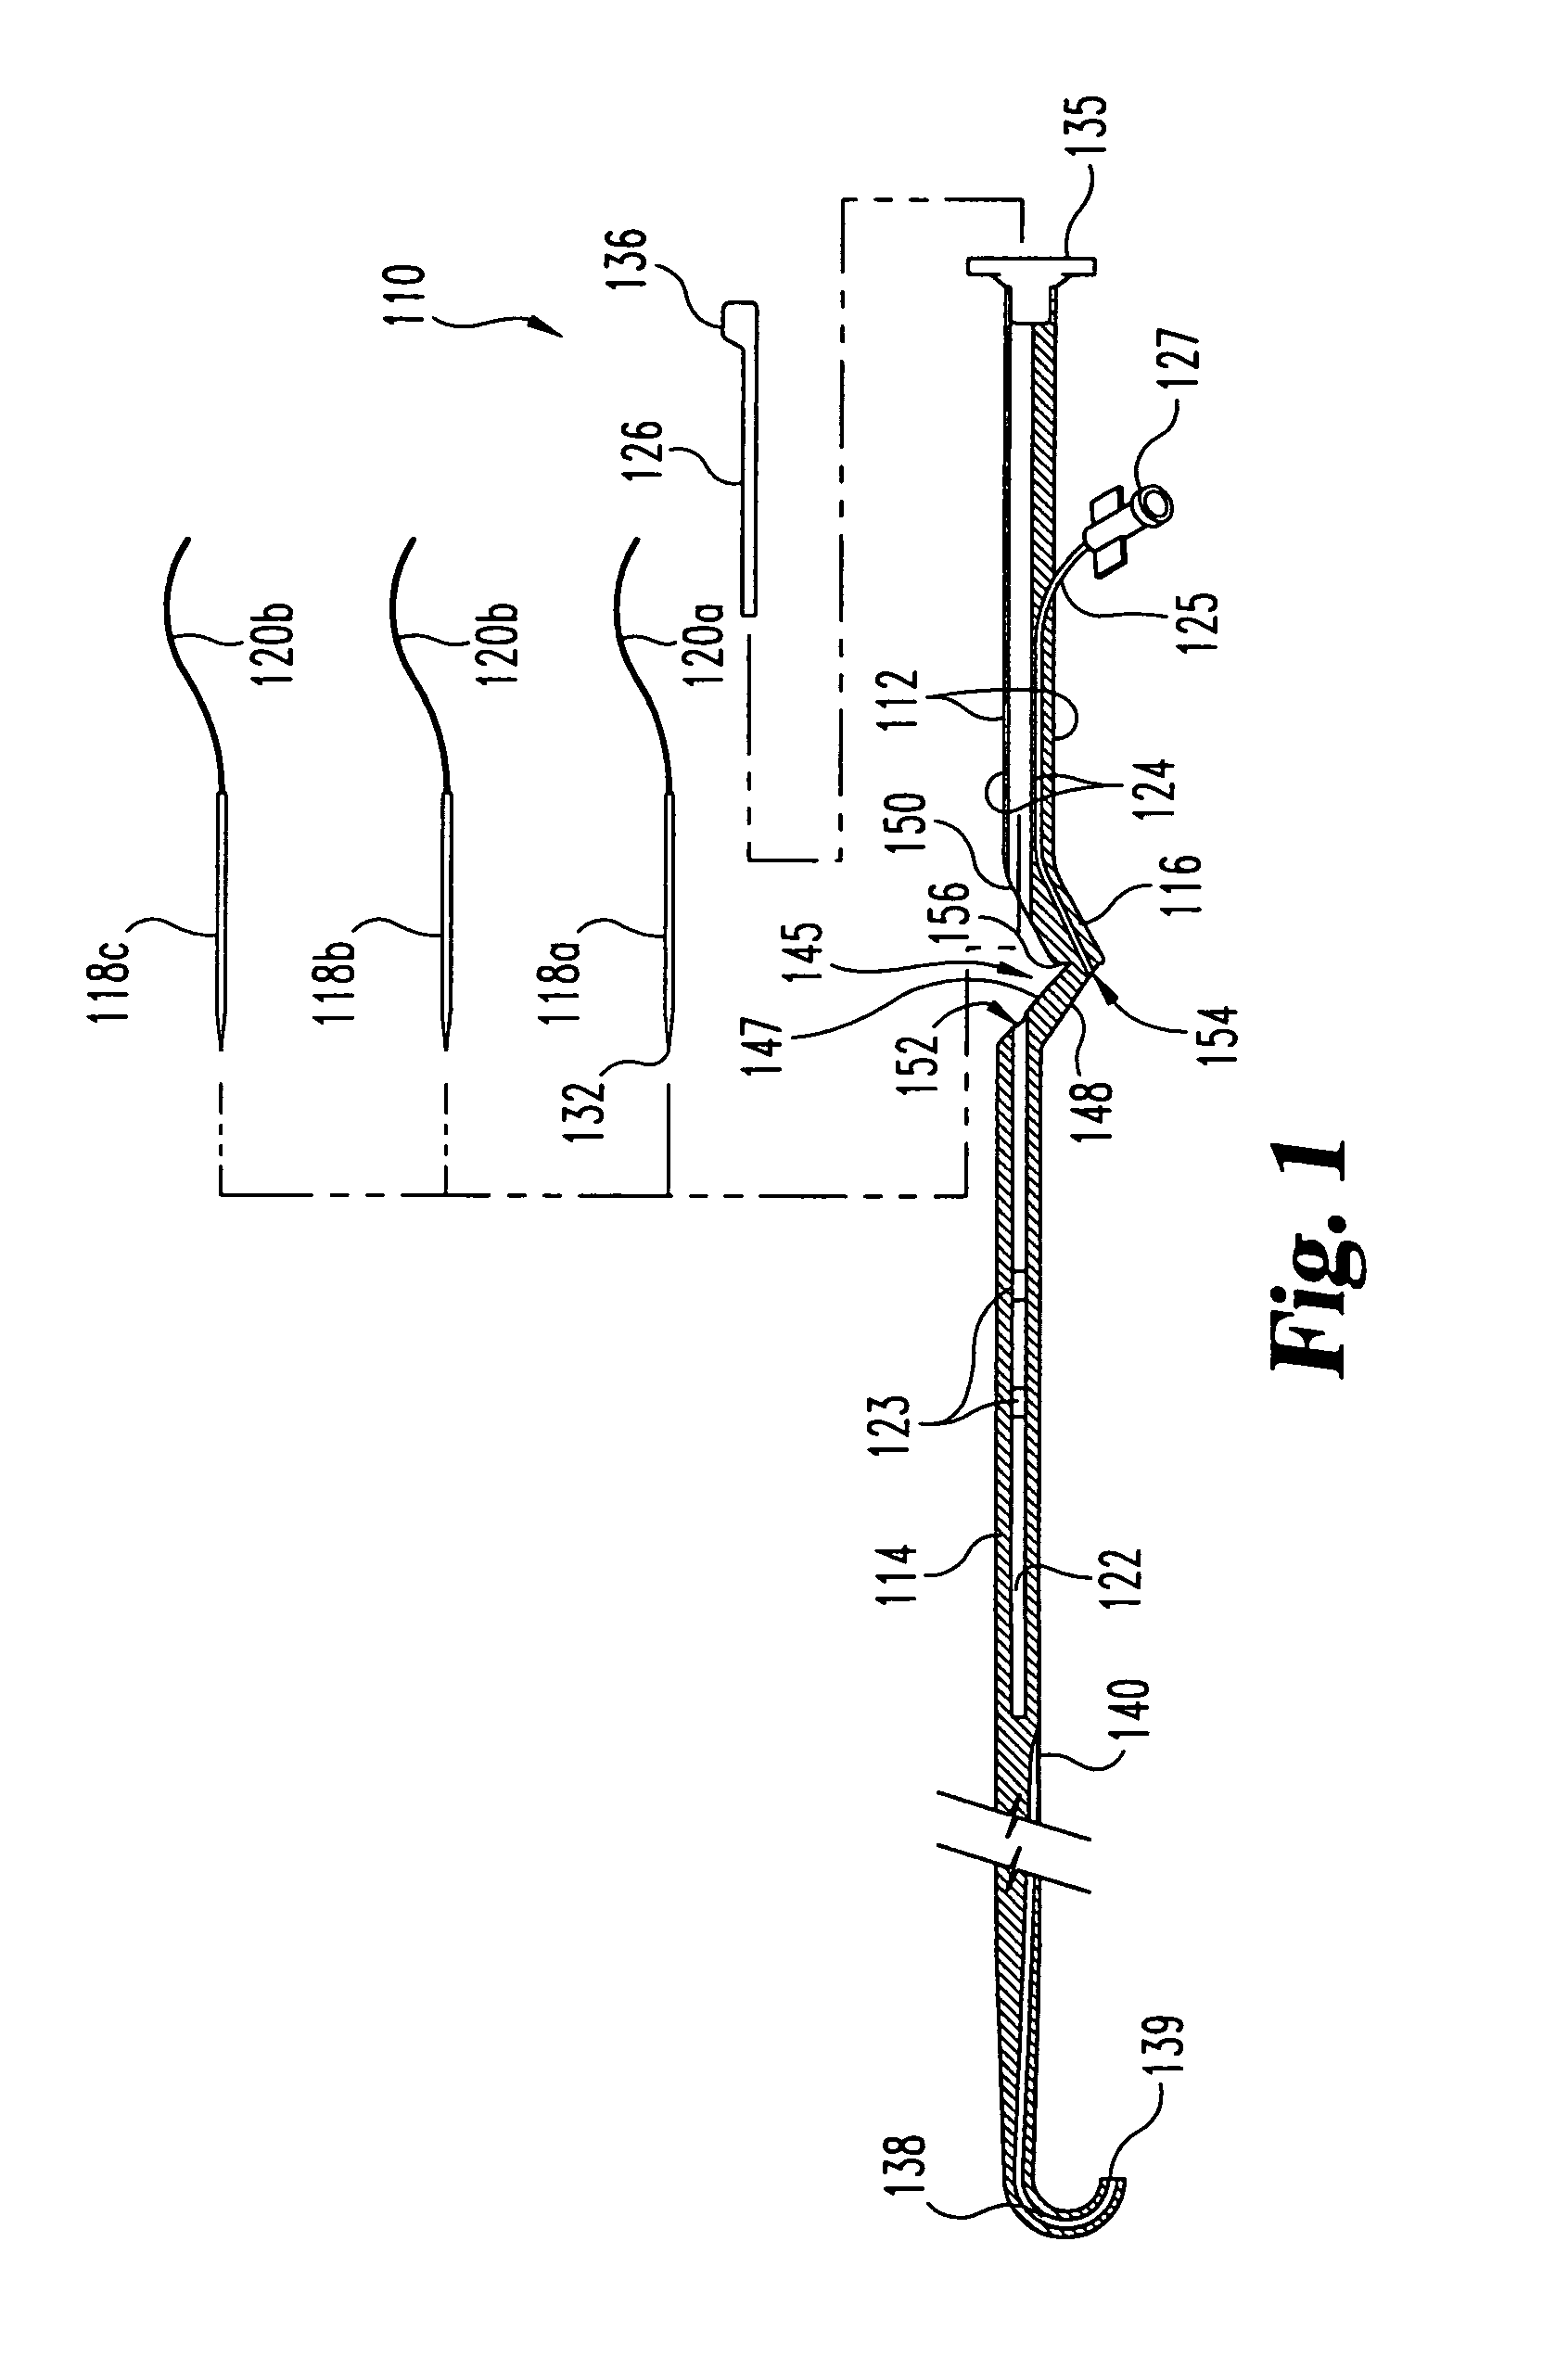 Vascular suturing device with needle capture